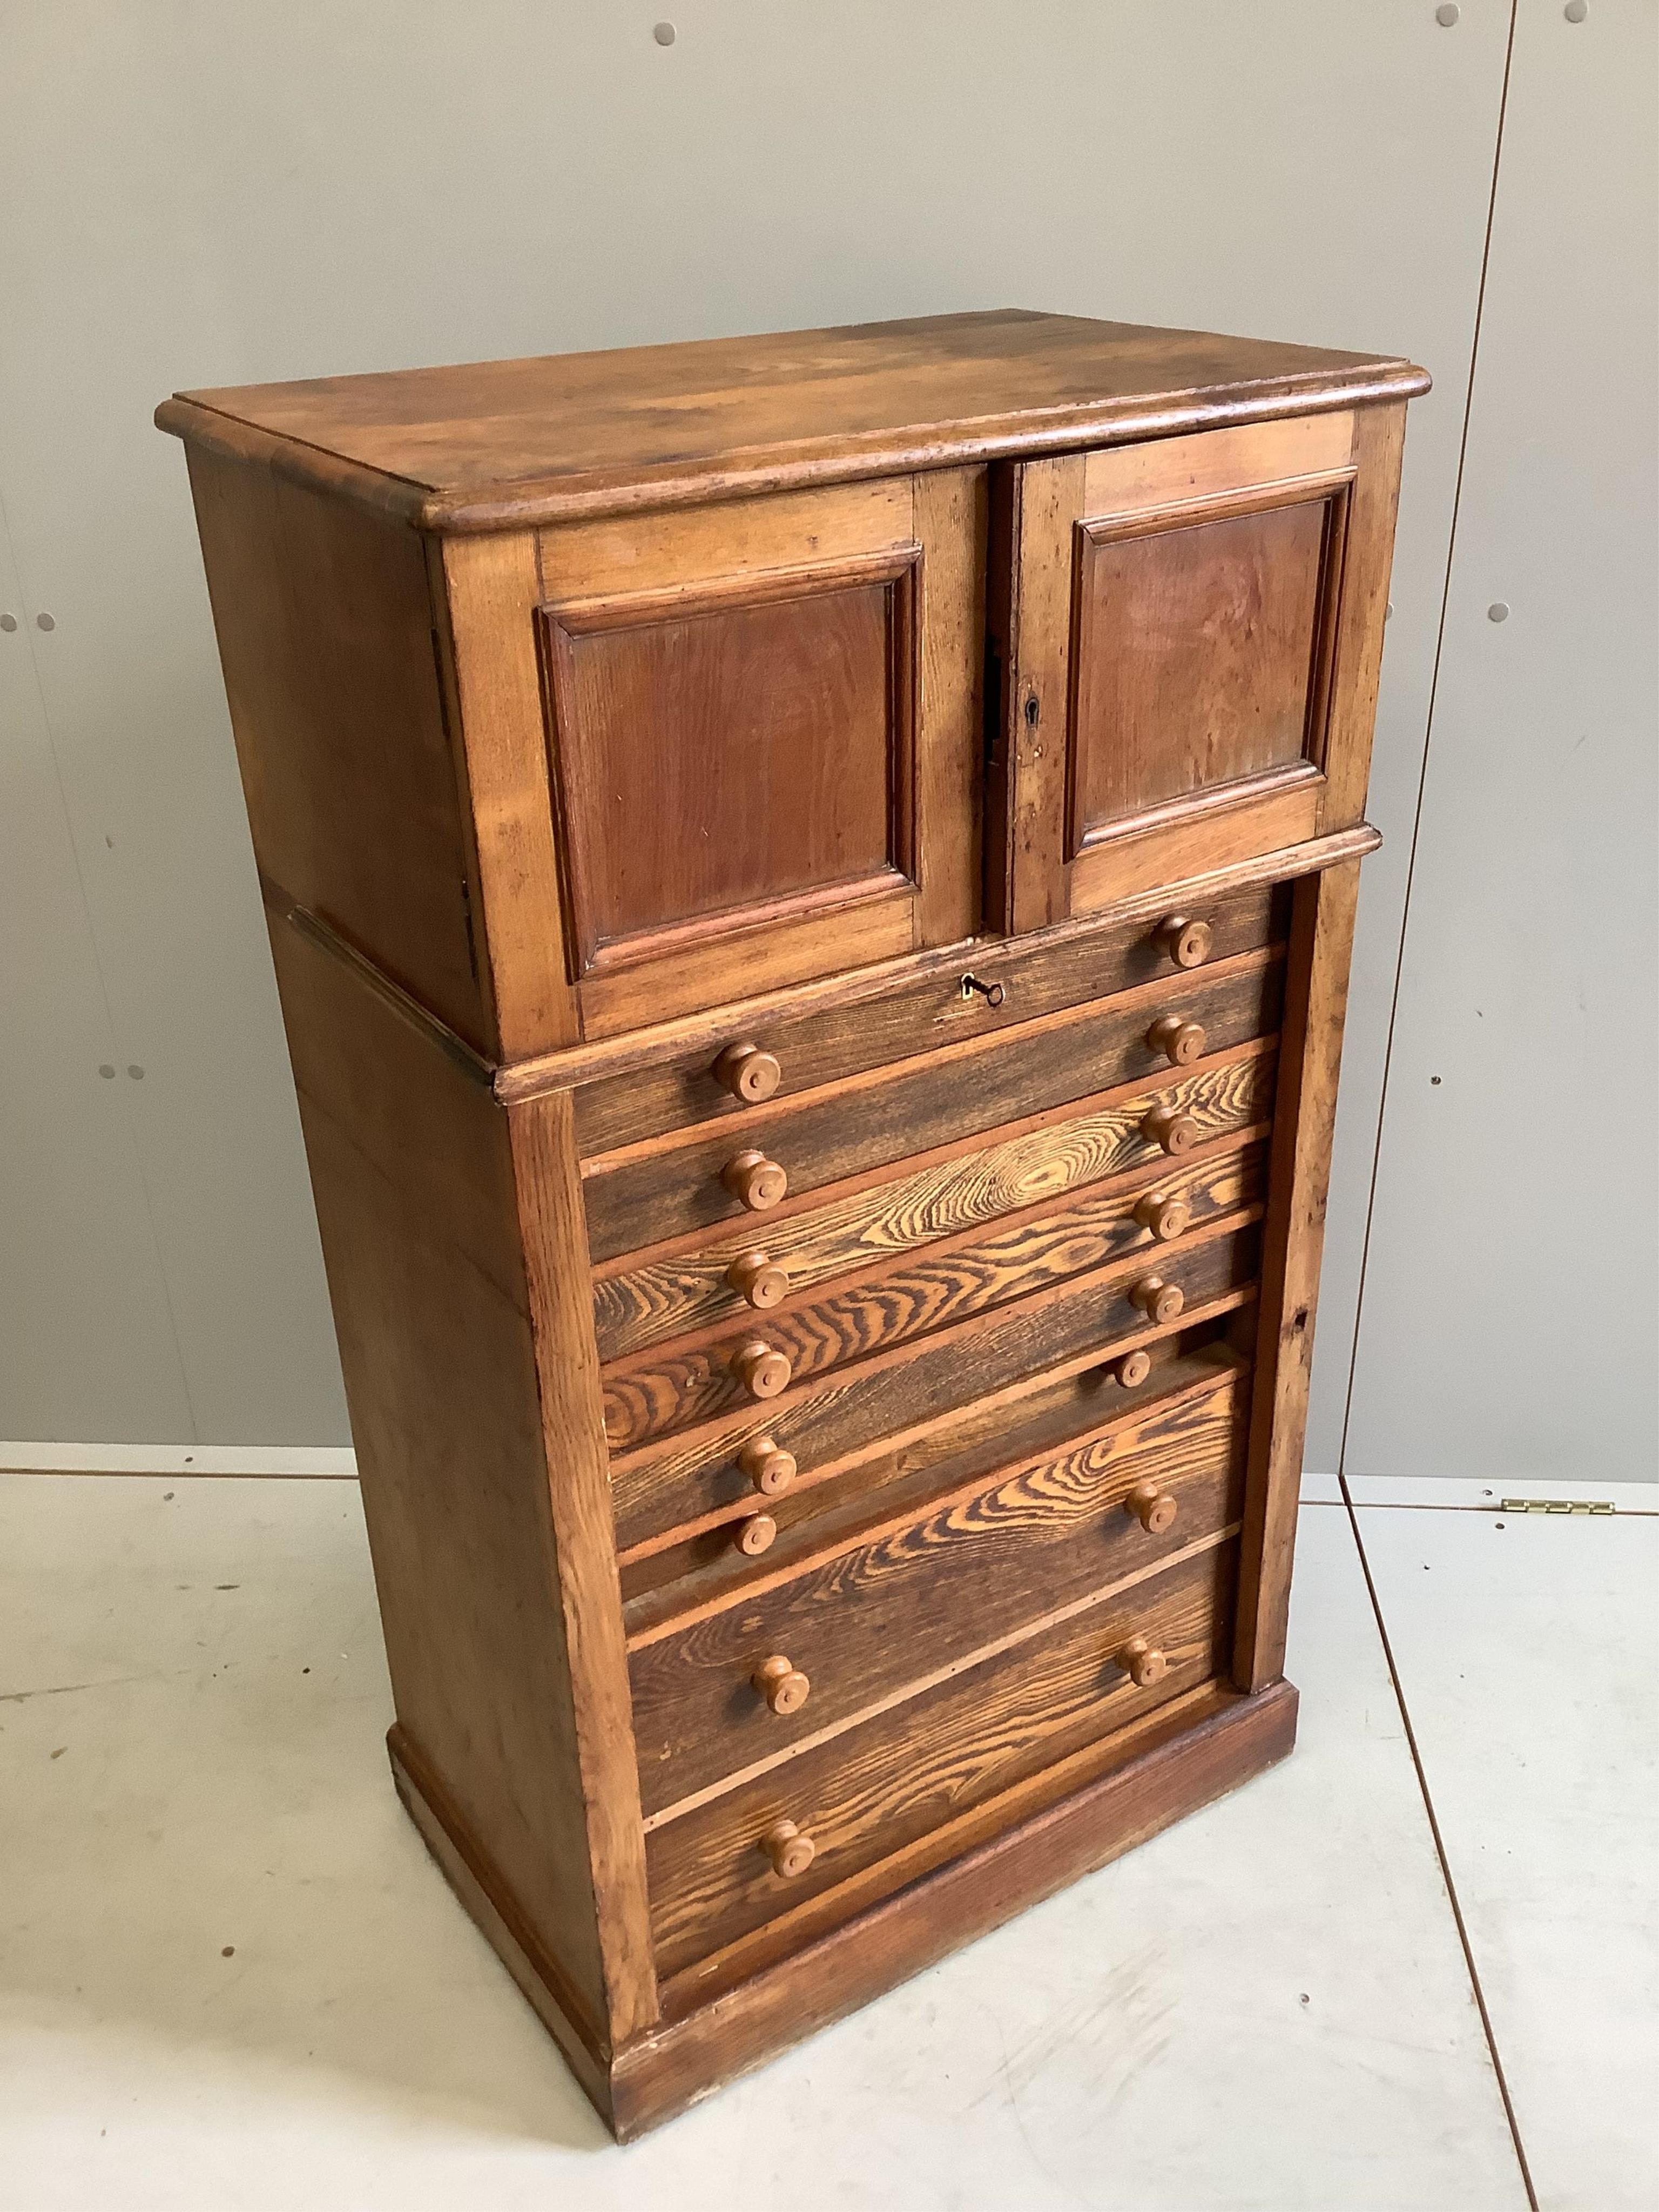 A Victorian style ash collector's chest, width 66cm, depth 40cm, height 113cm. Condition - fair